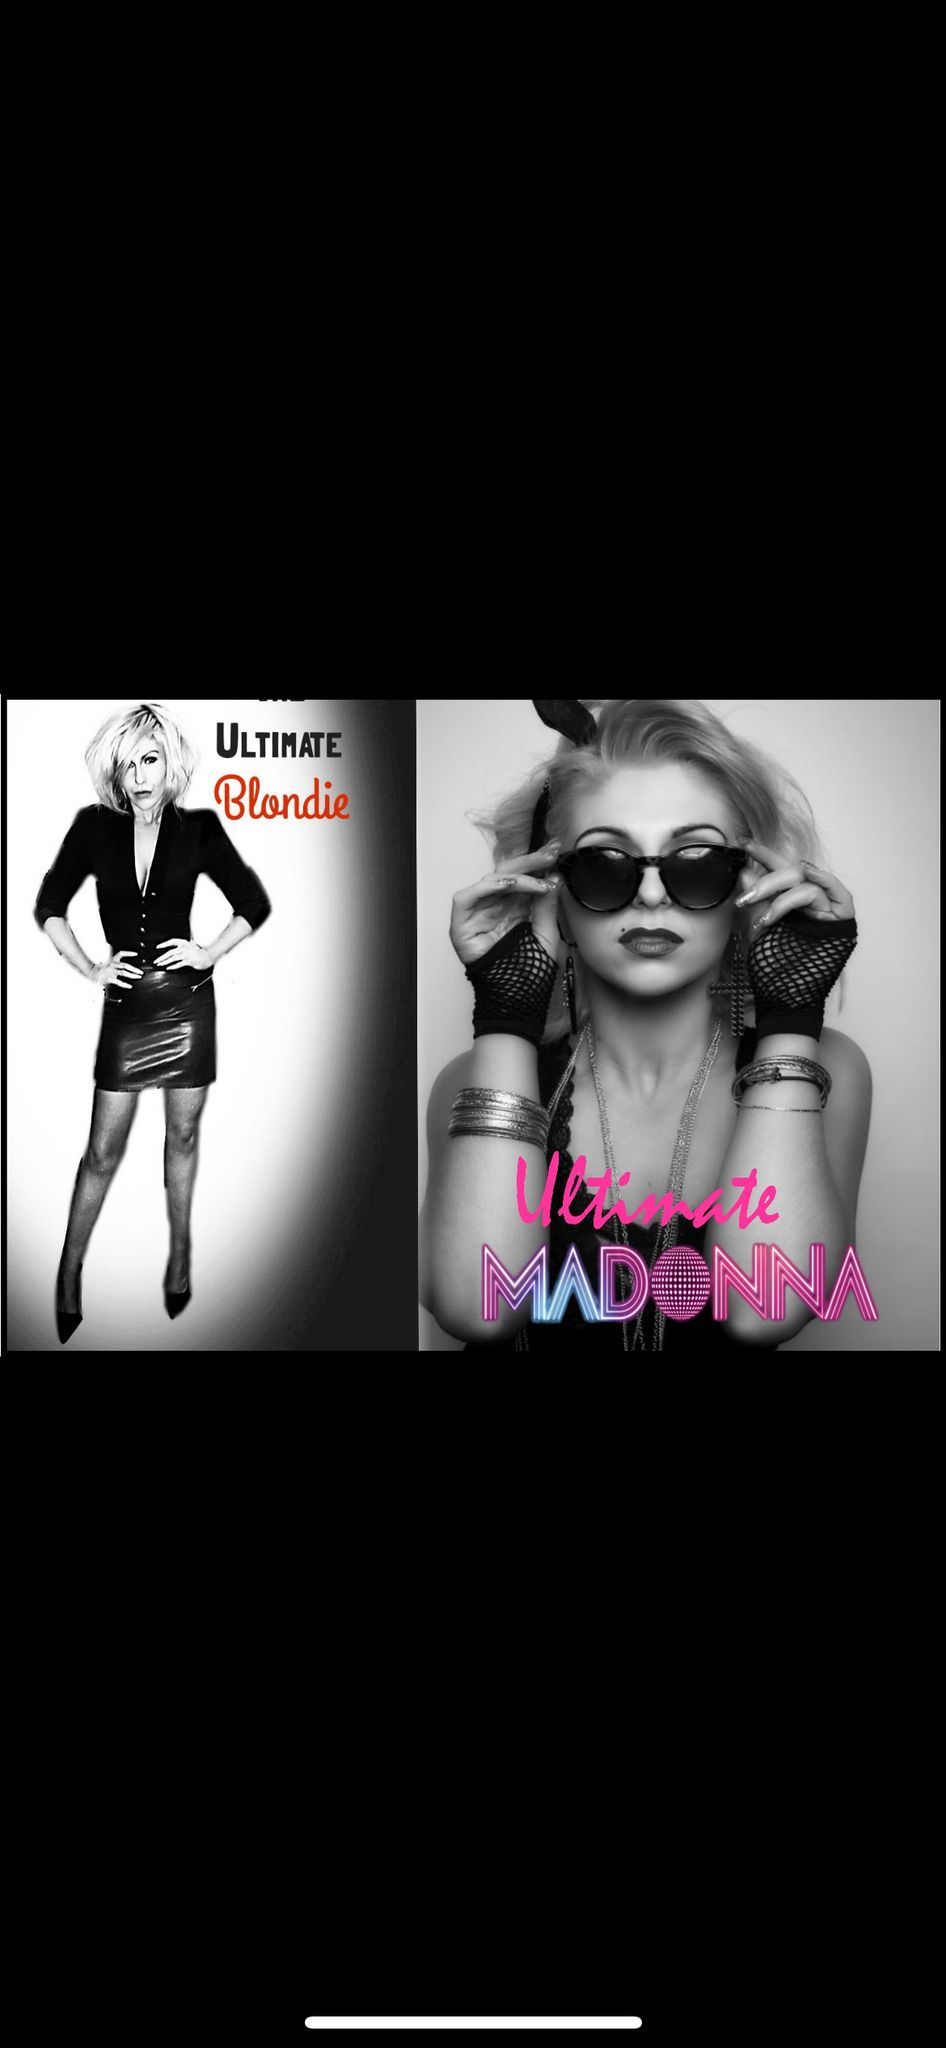 Blondie and Madonna Tribute 